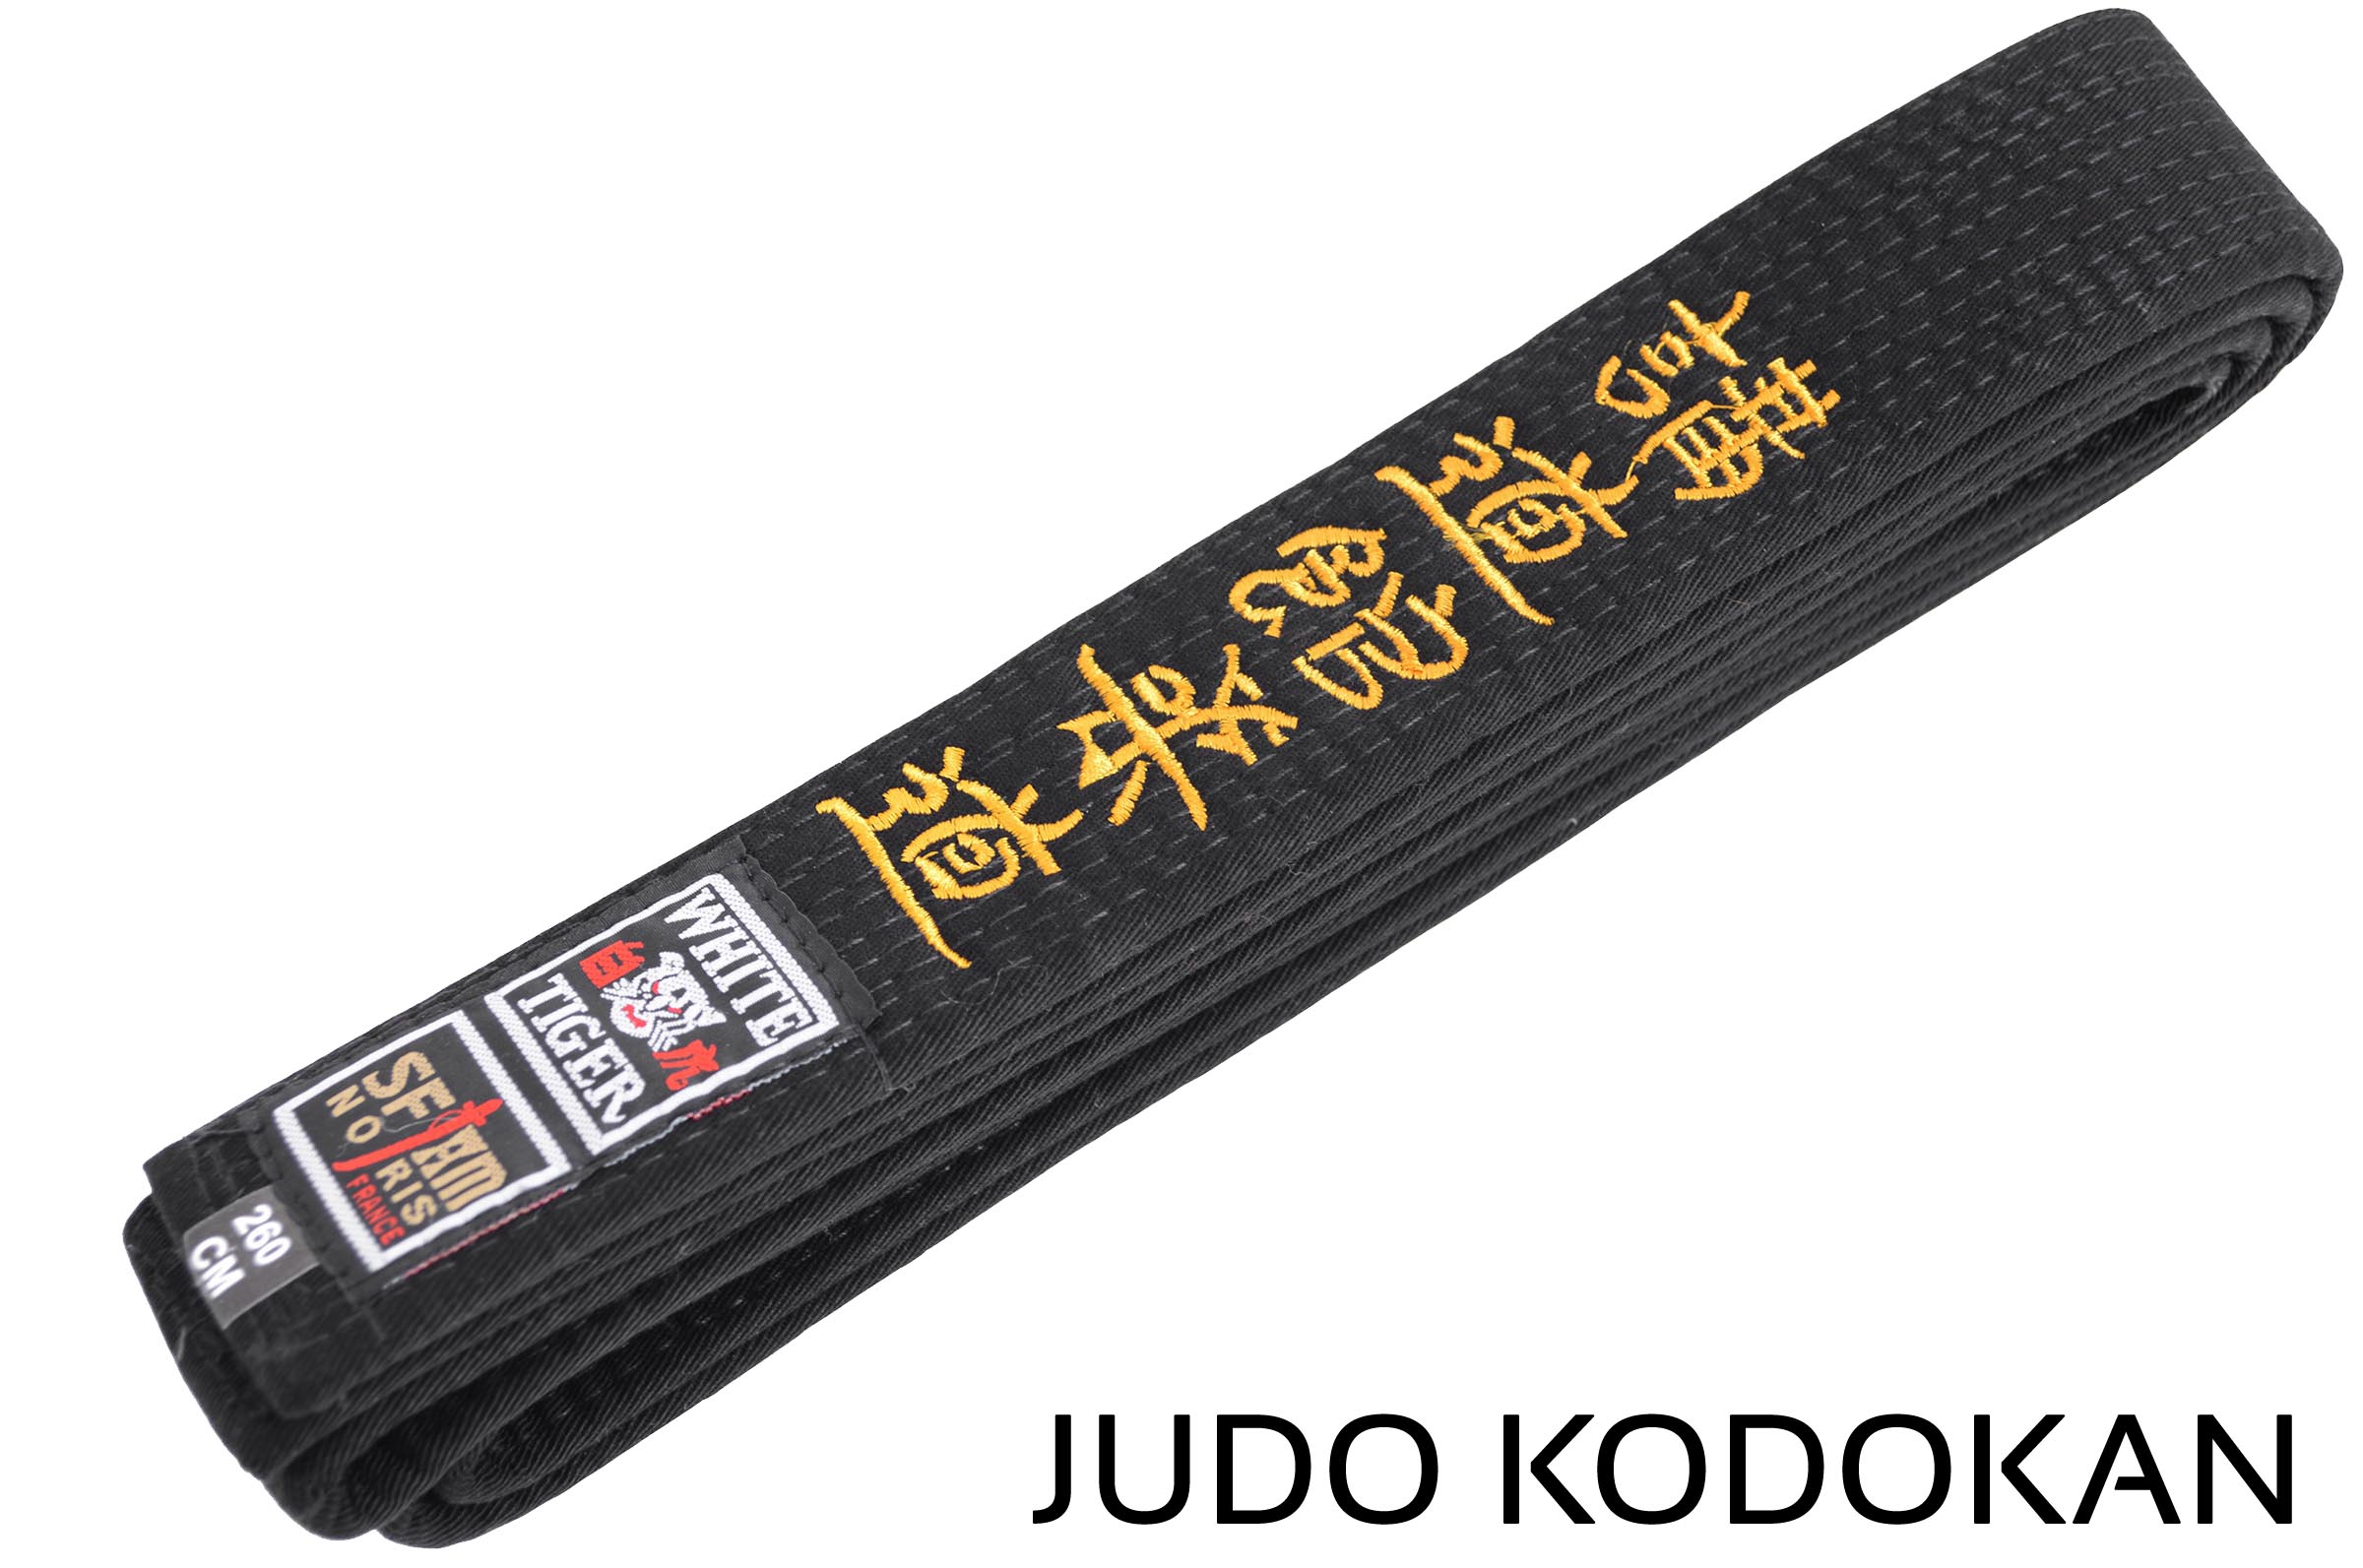 White Solid Belts 4 cm Wide Double Wrap Sizing for Martial Arts Fast Shipping. 